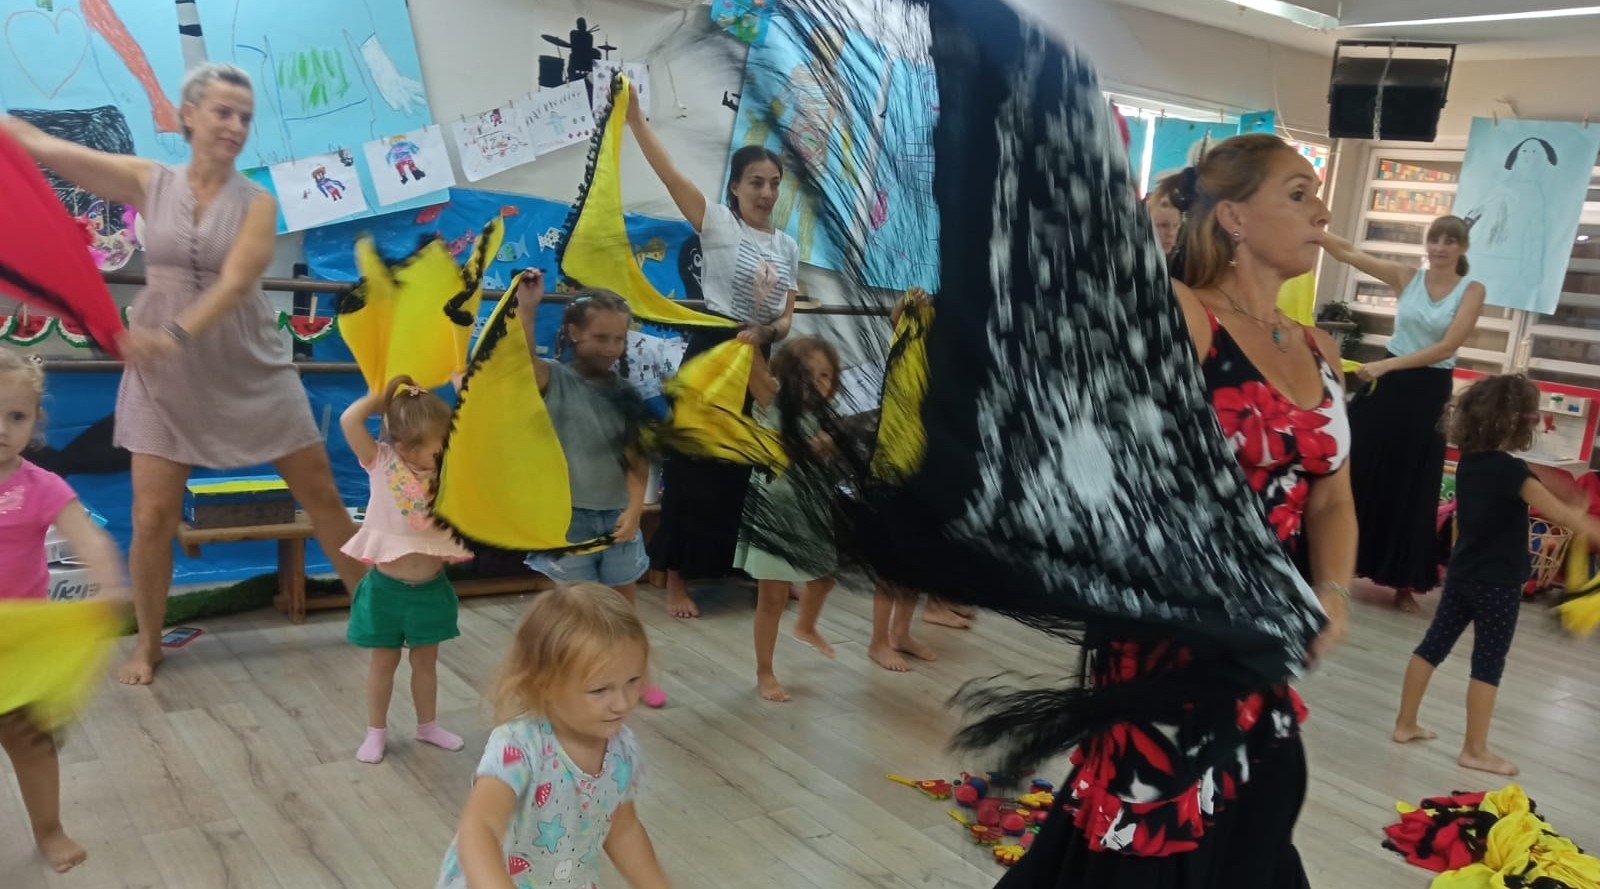 Flamenco dancers visit a center in Netanya, Israel, for evacuees from Ukraine as part of an educational activity for children. (UJA-Federation)